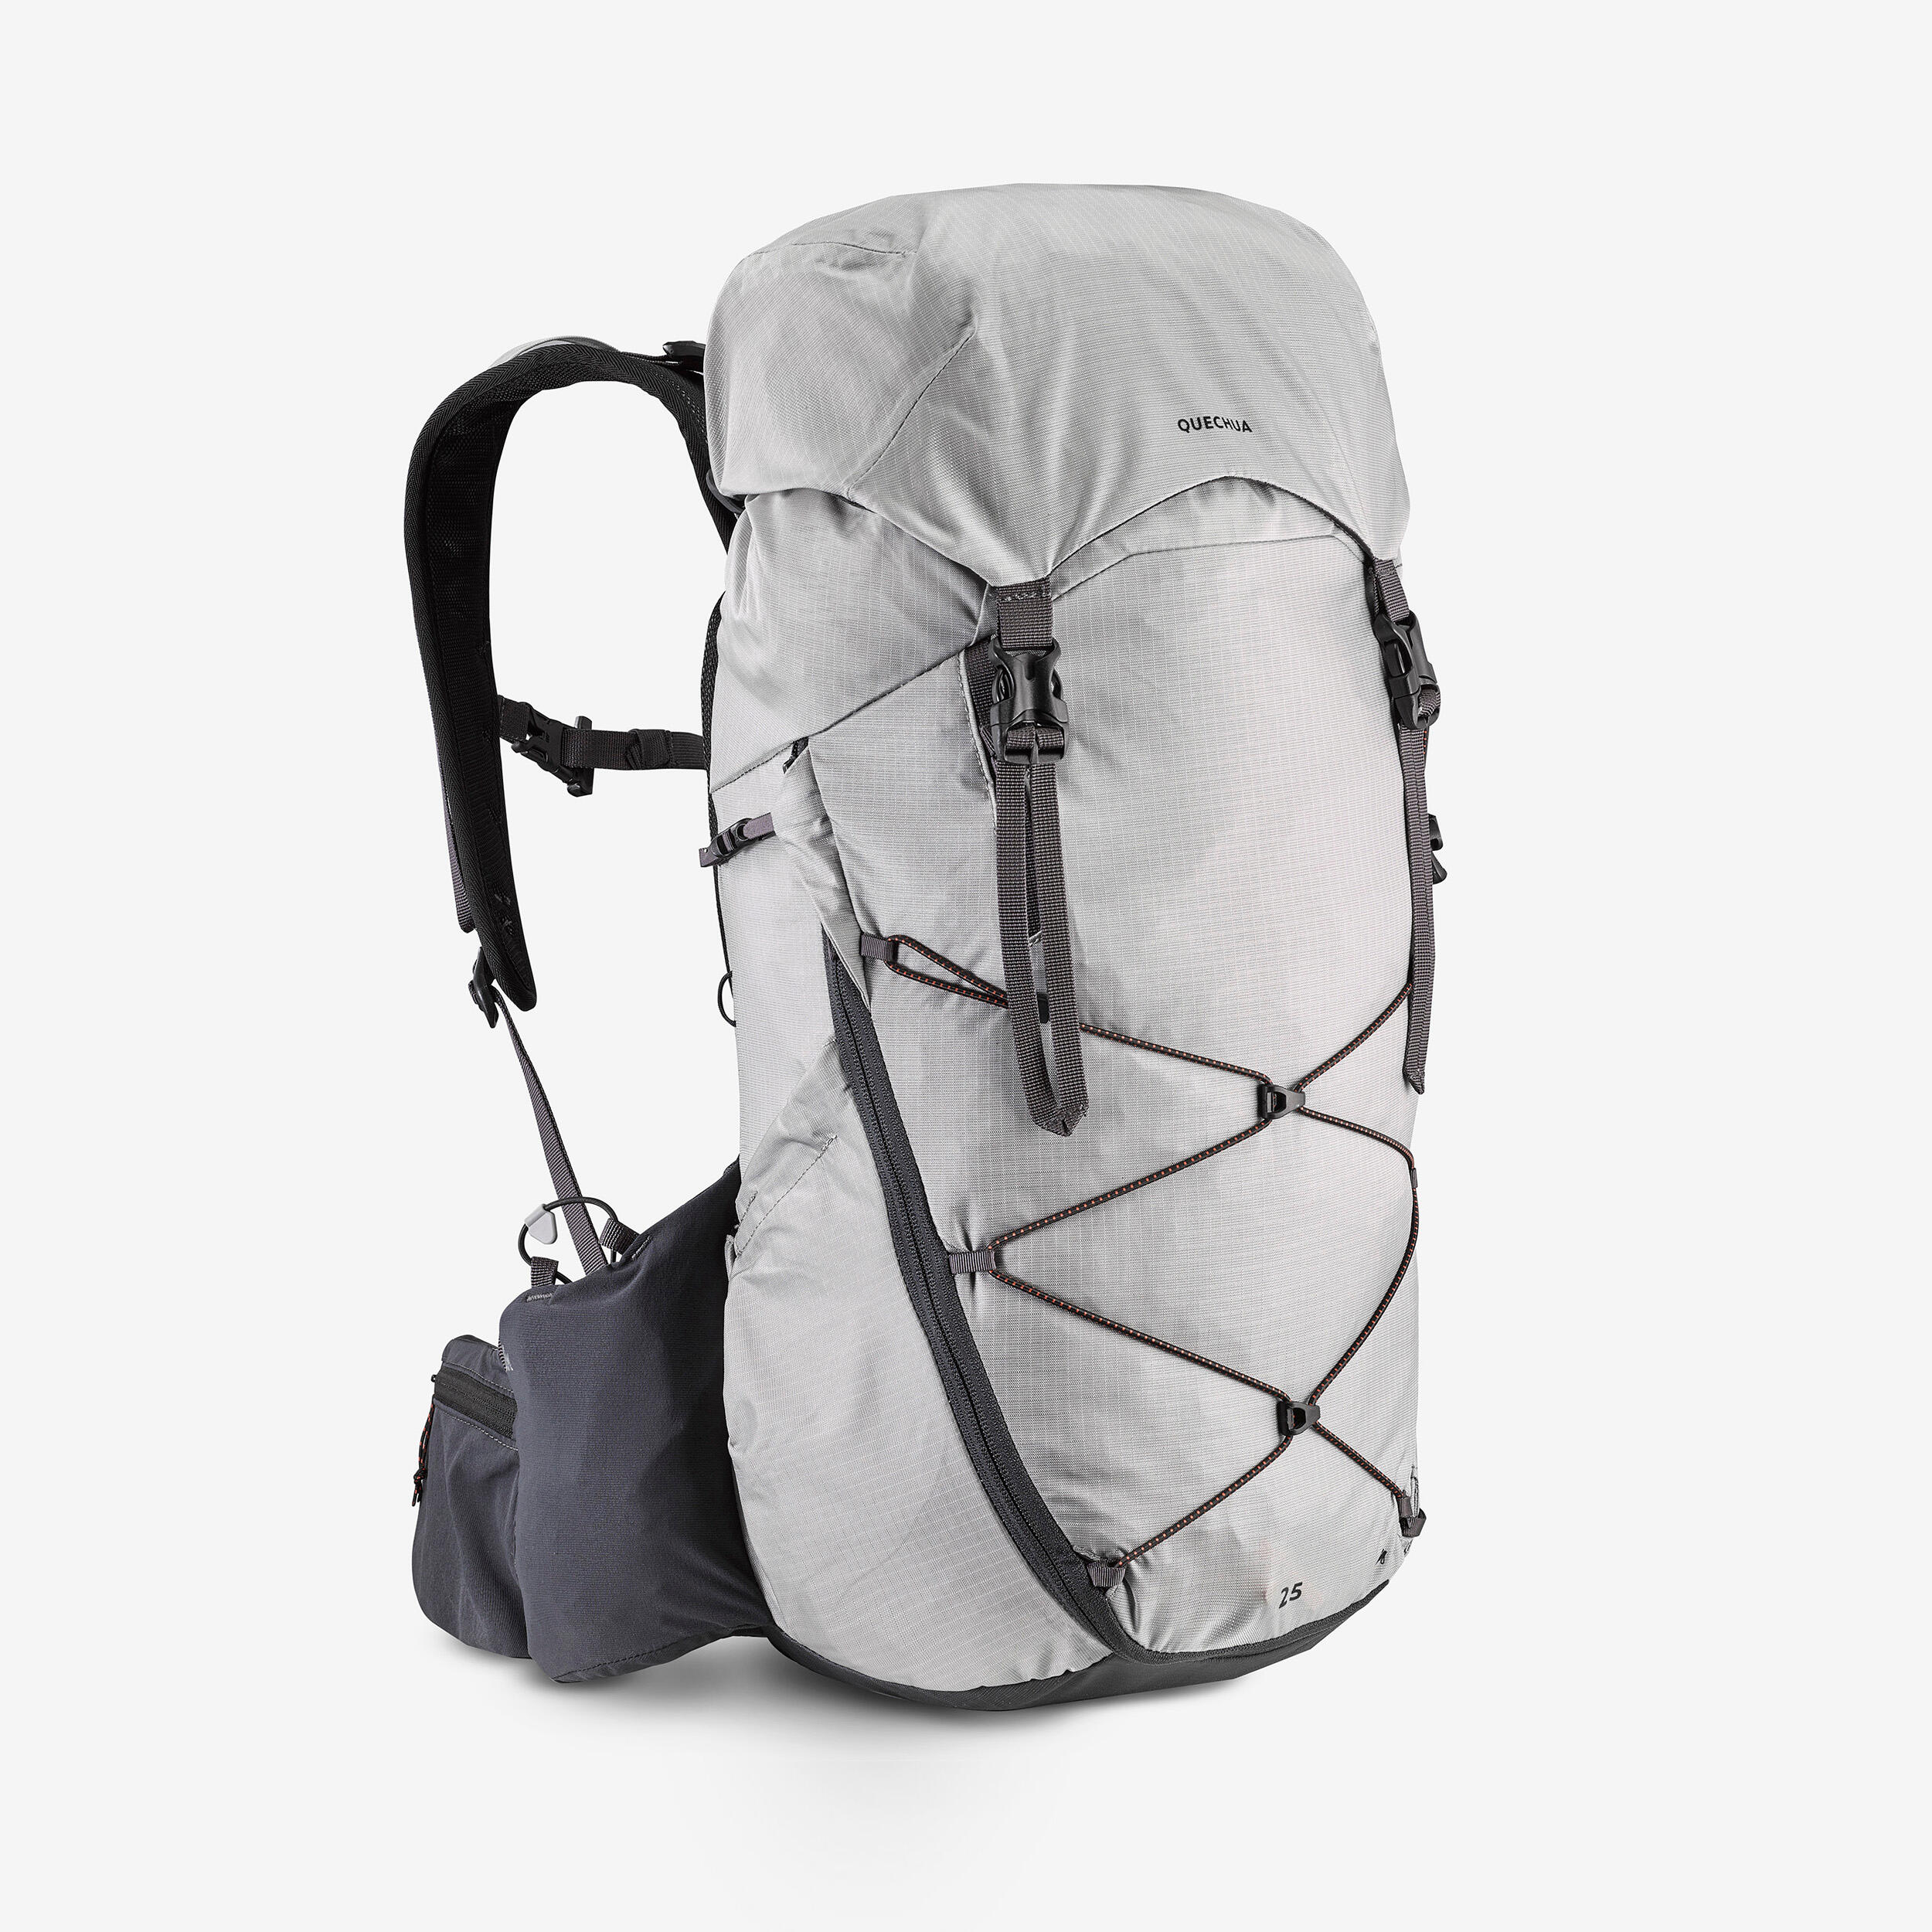 Mountain hiking backpack 25L - MH900 1/18